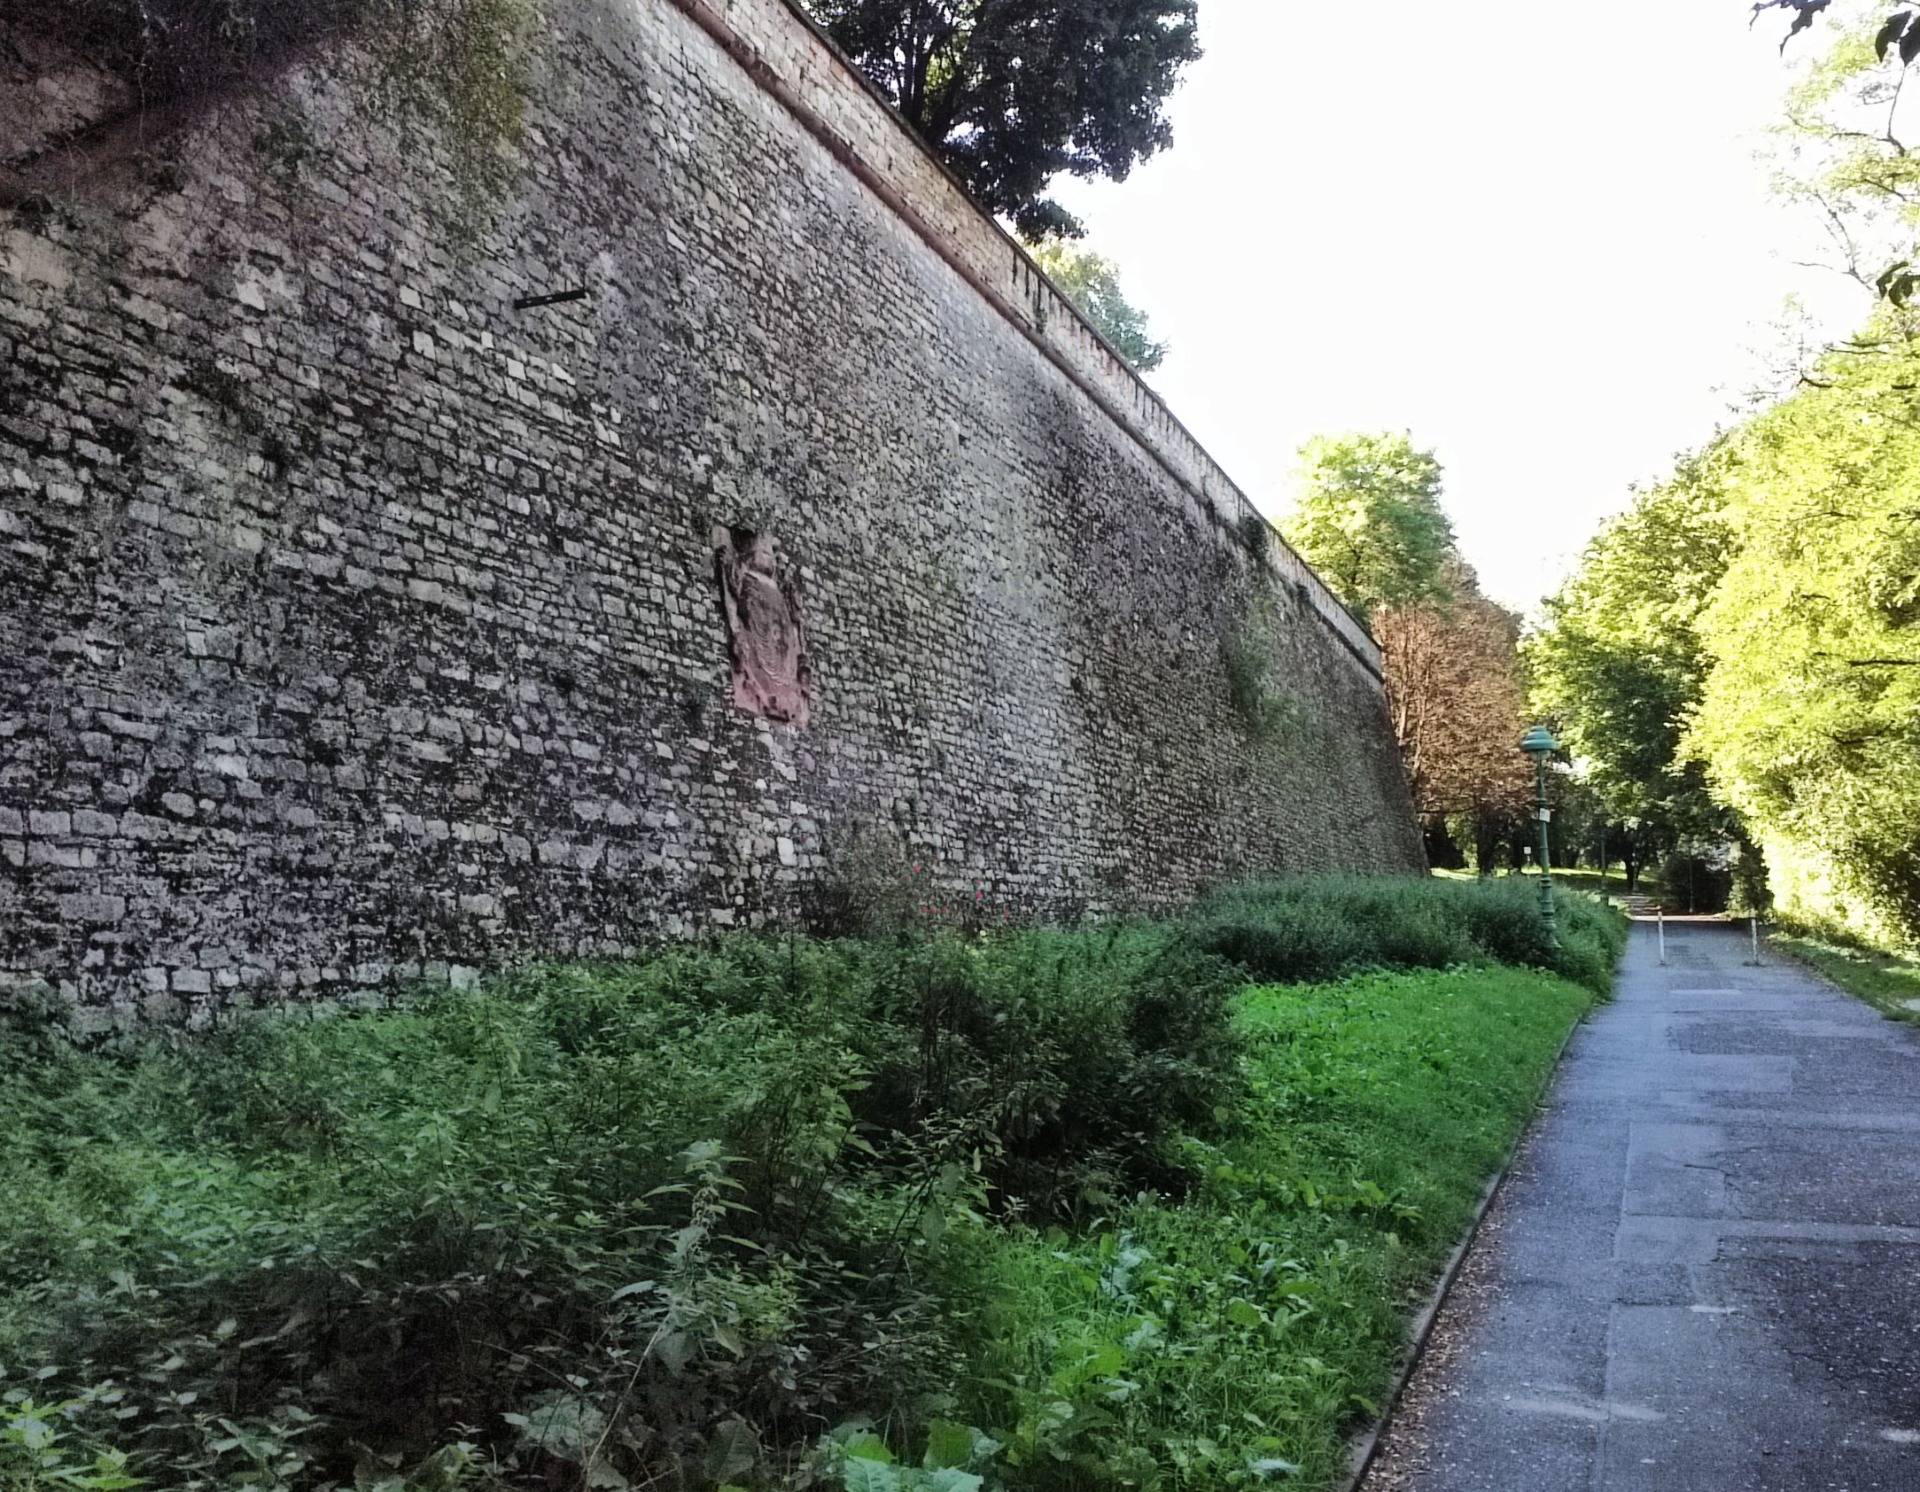 Outter wall of the 18th century citadel